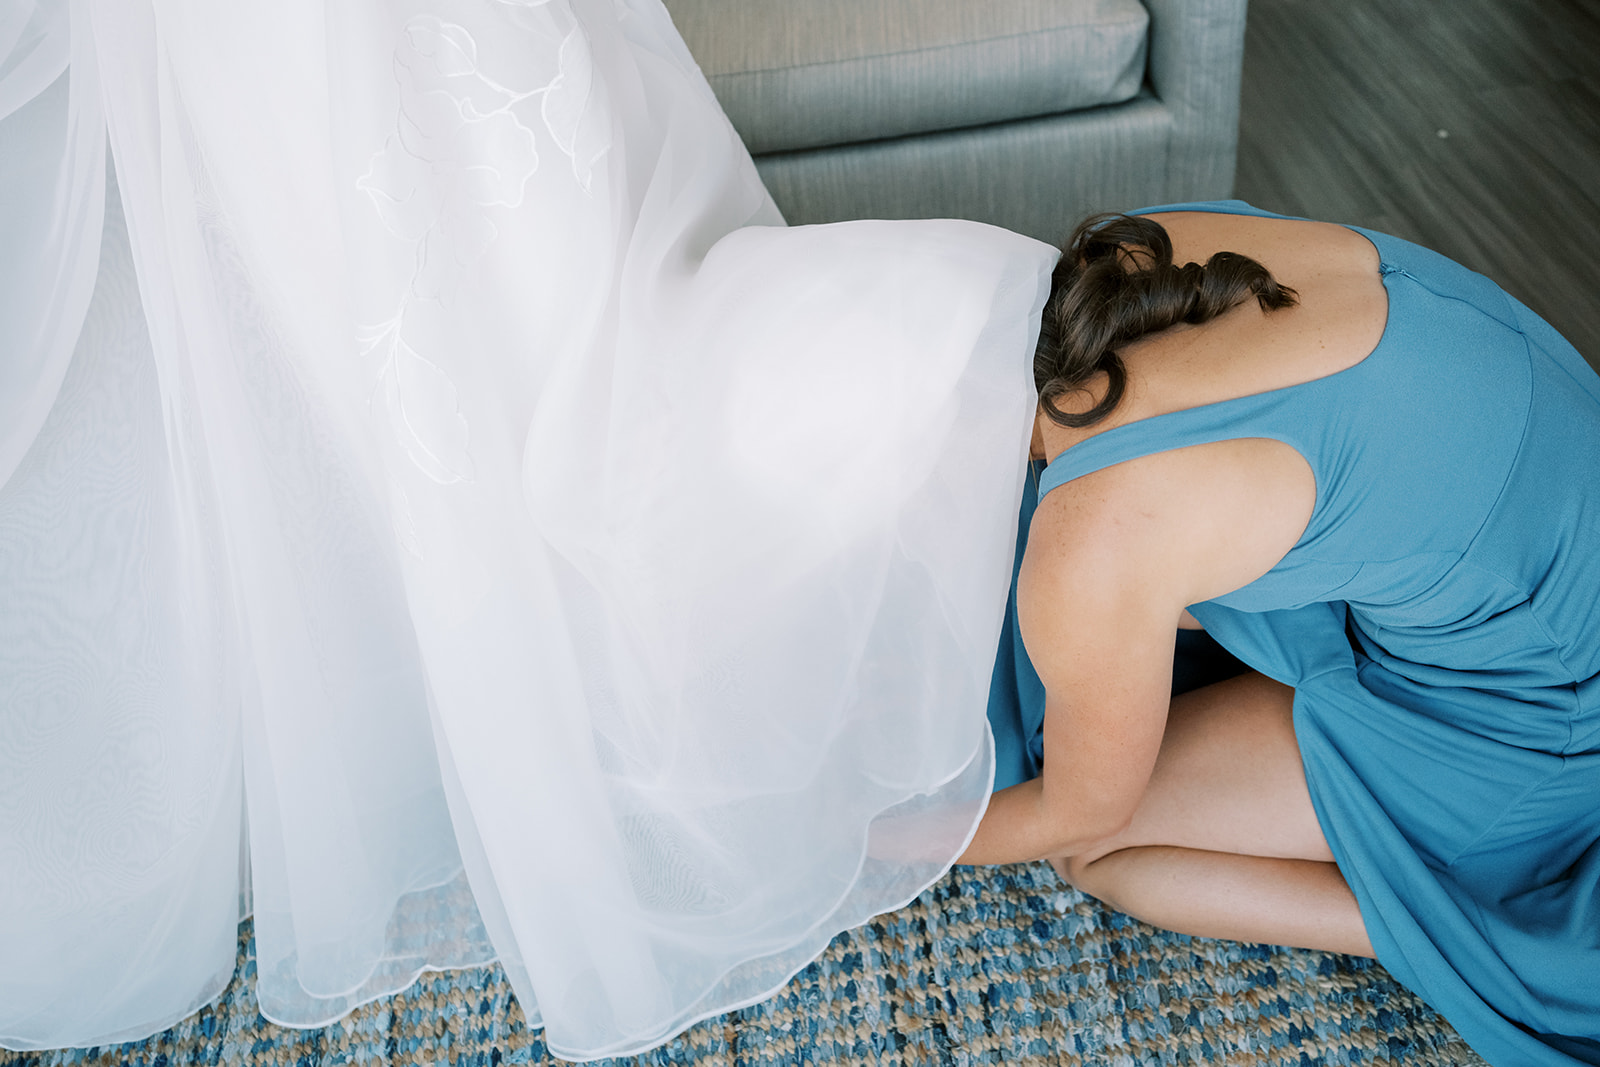 maid of honor puts on shoes underneath the wedding dress at saint michaels wedding